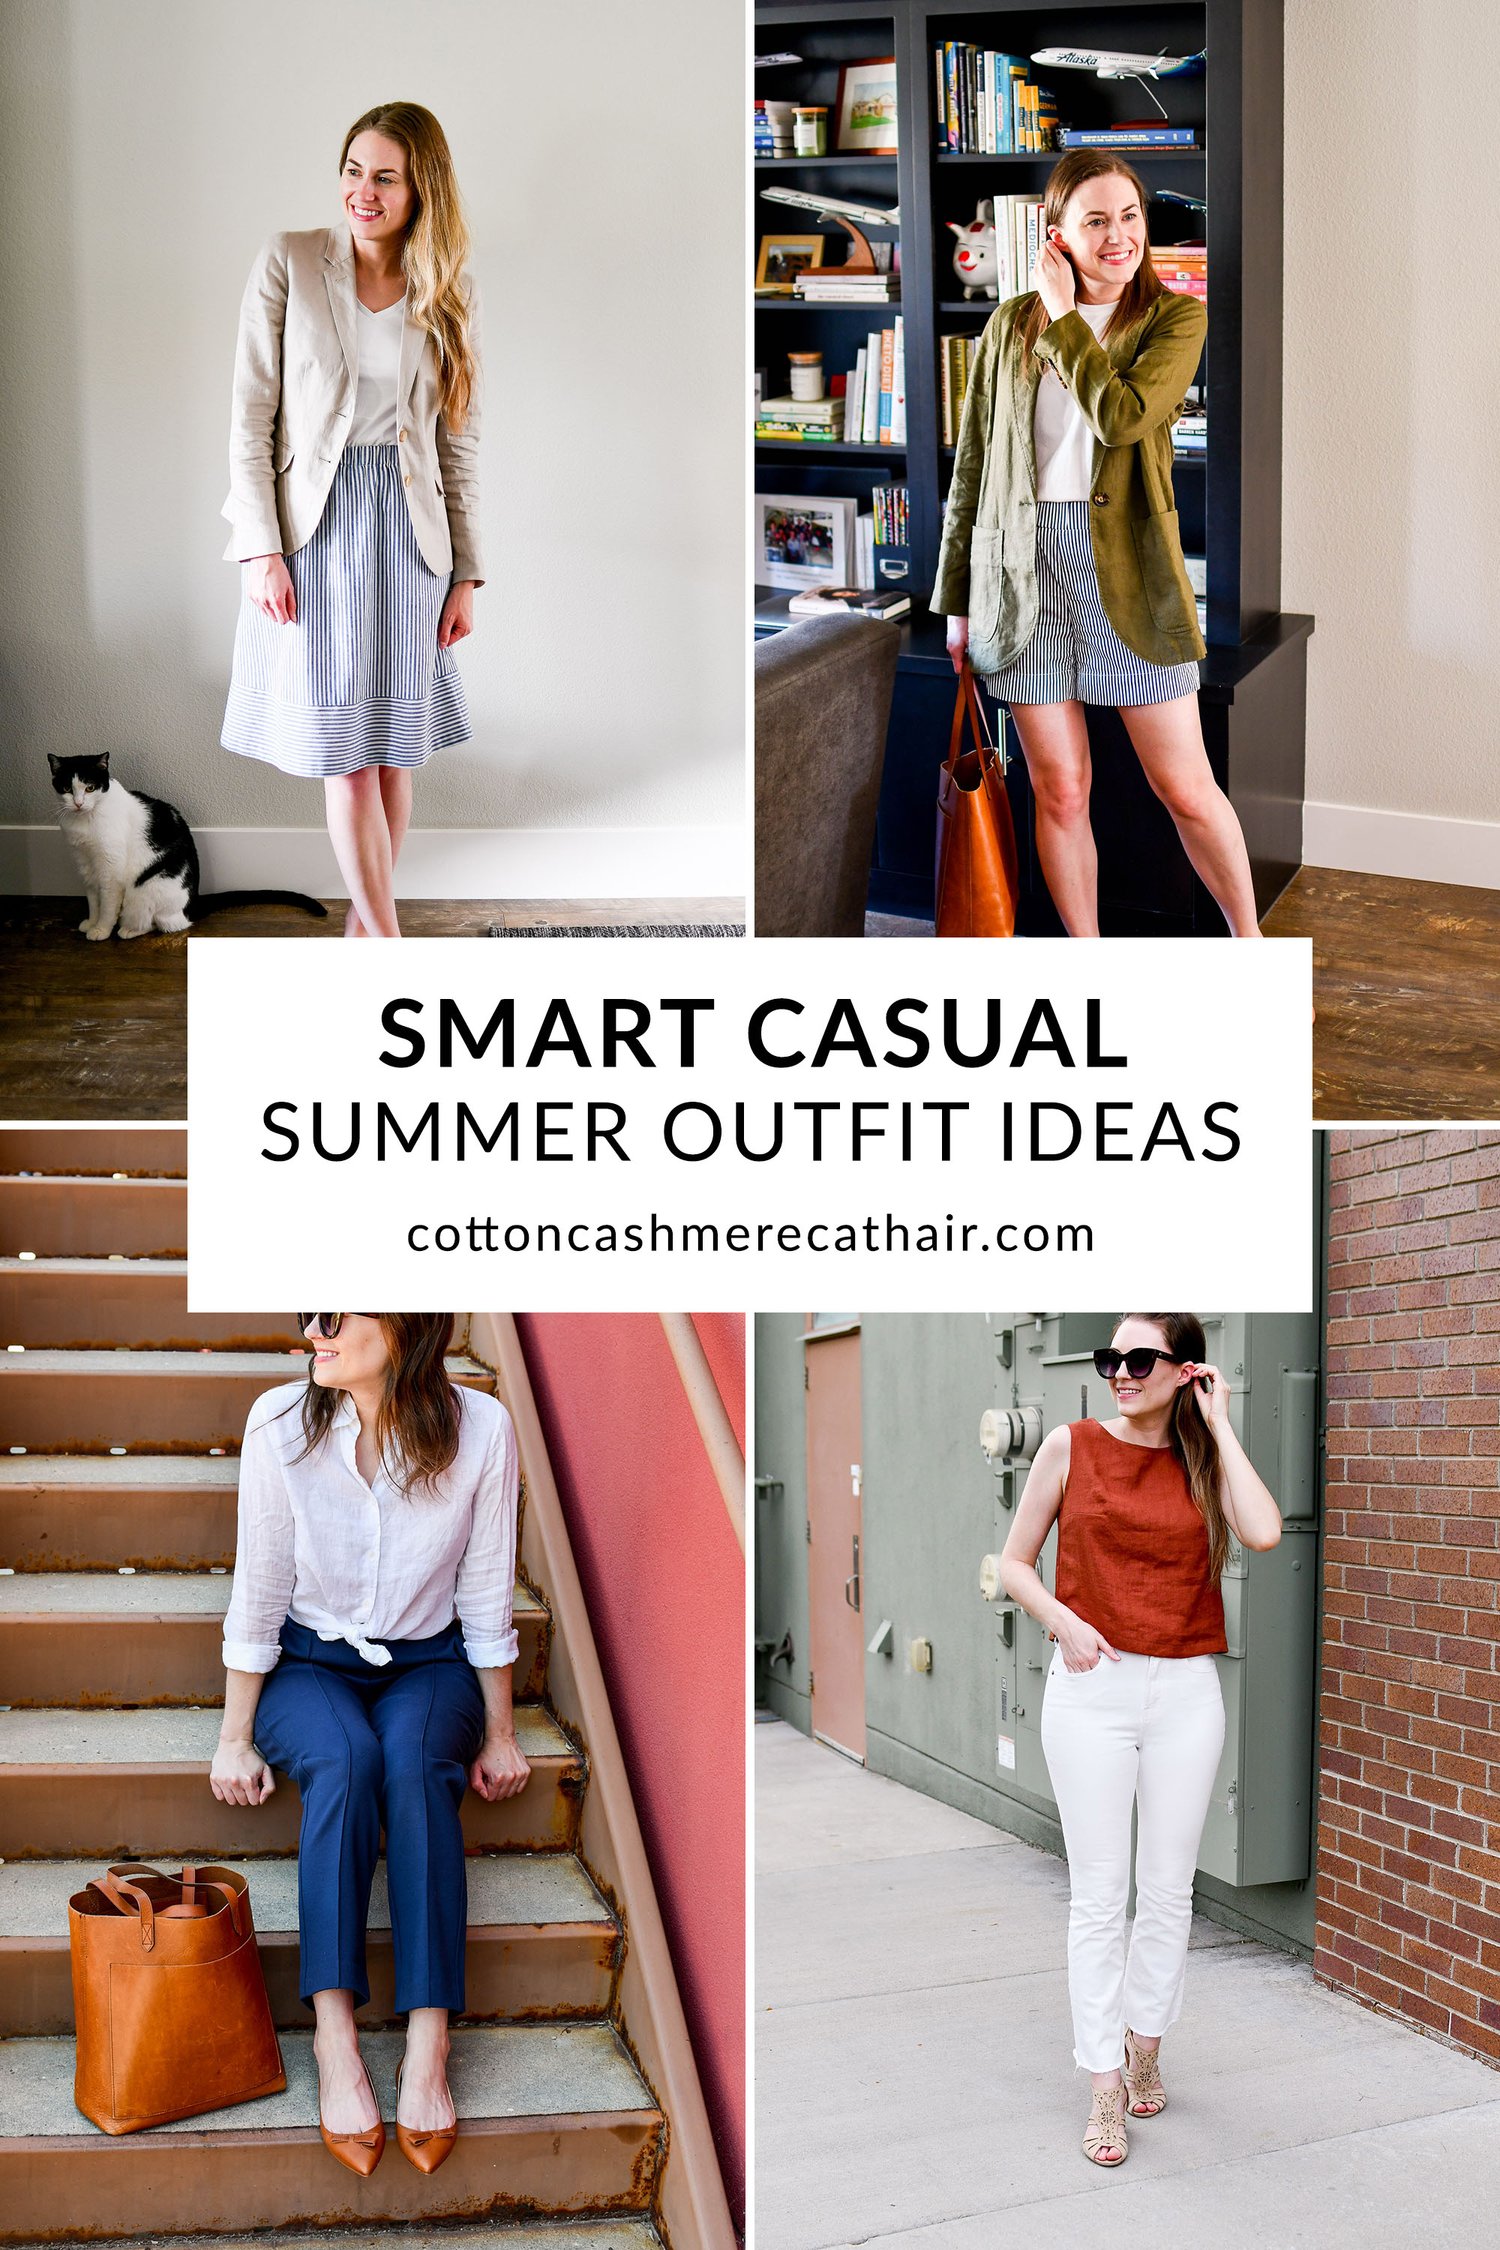 SUMMER OUTFIT IDEAS FOR DAYTIME (CASUAL AND SMART LOOKS FOR WARM WEATHER) 